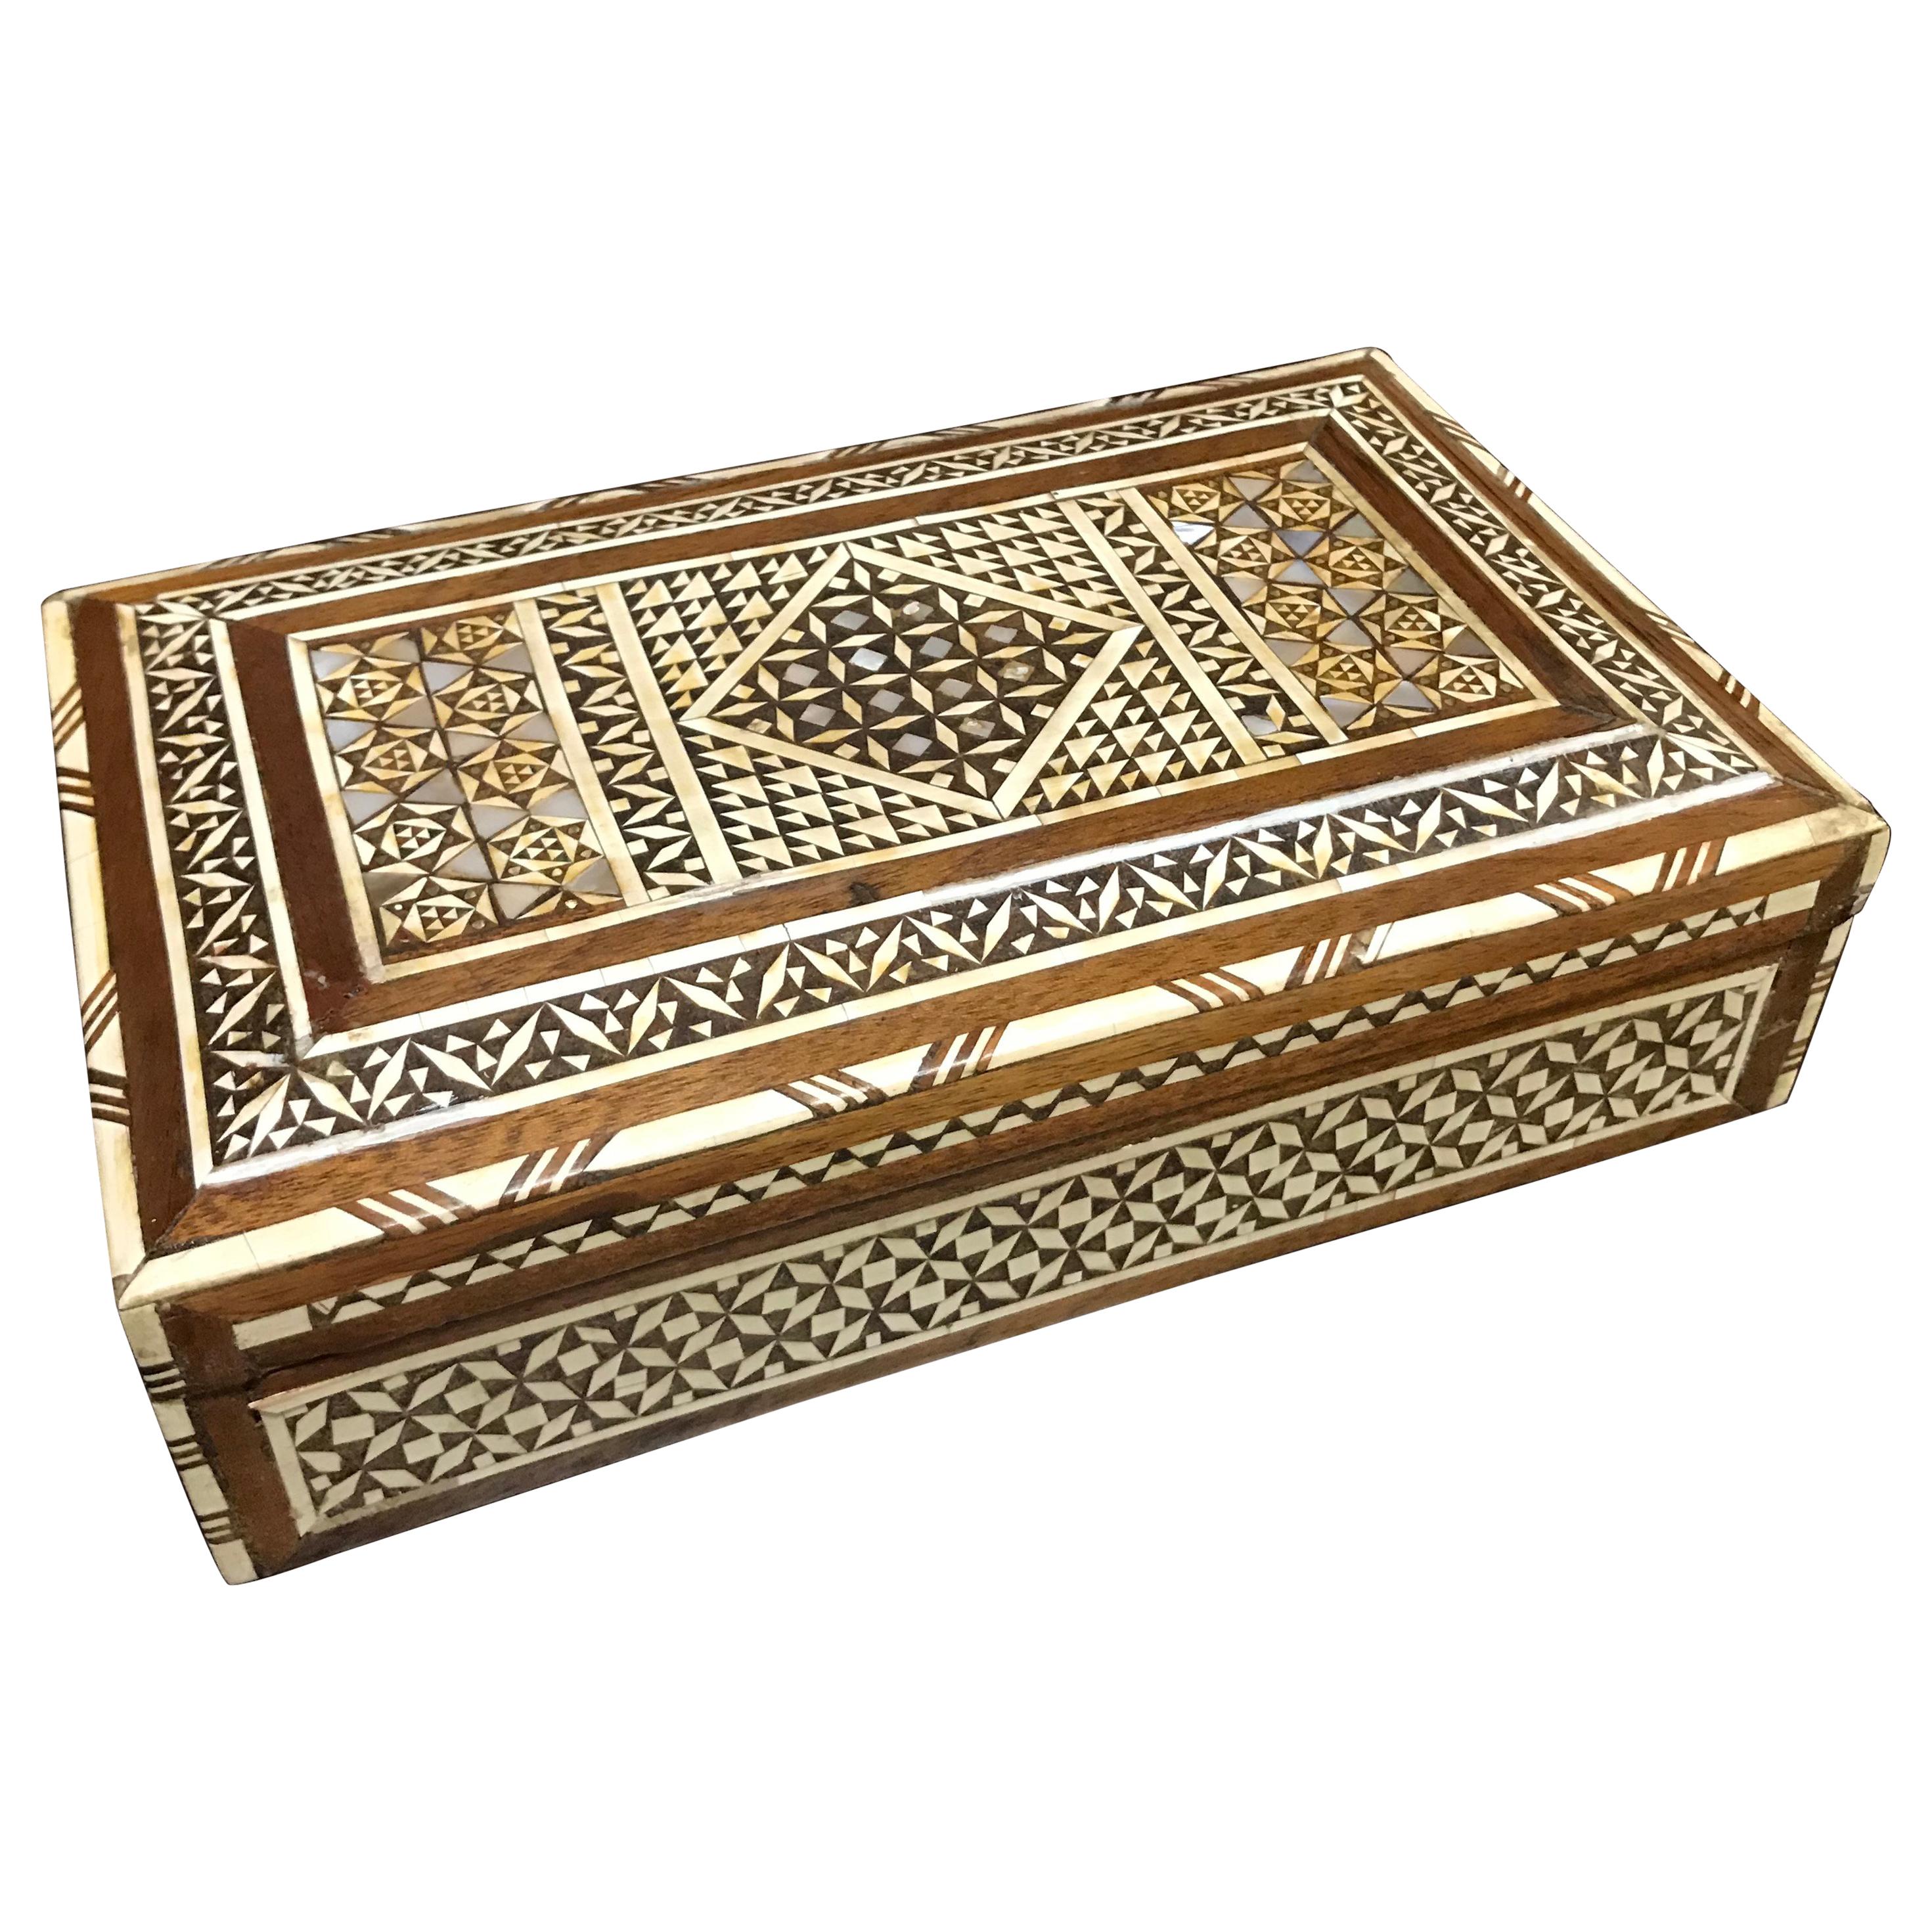 Anglo Indian Box with Mother-of-Pearl Inlay